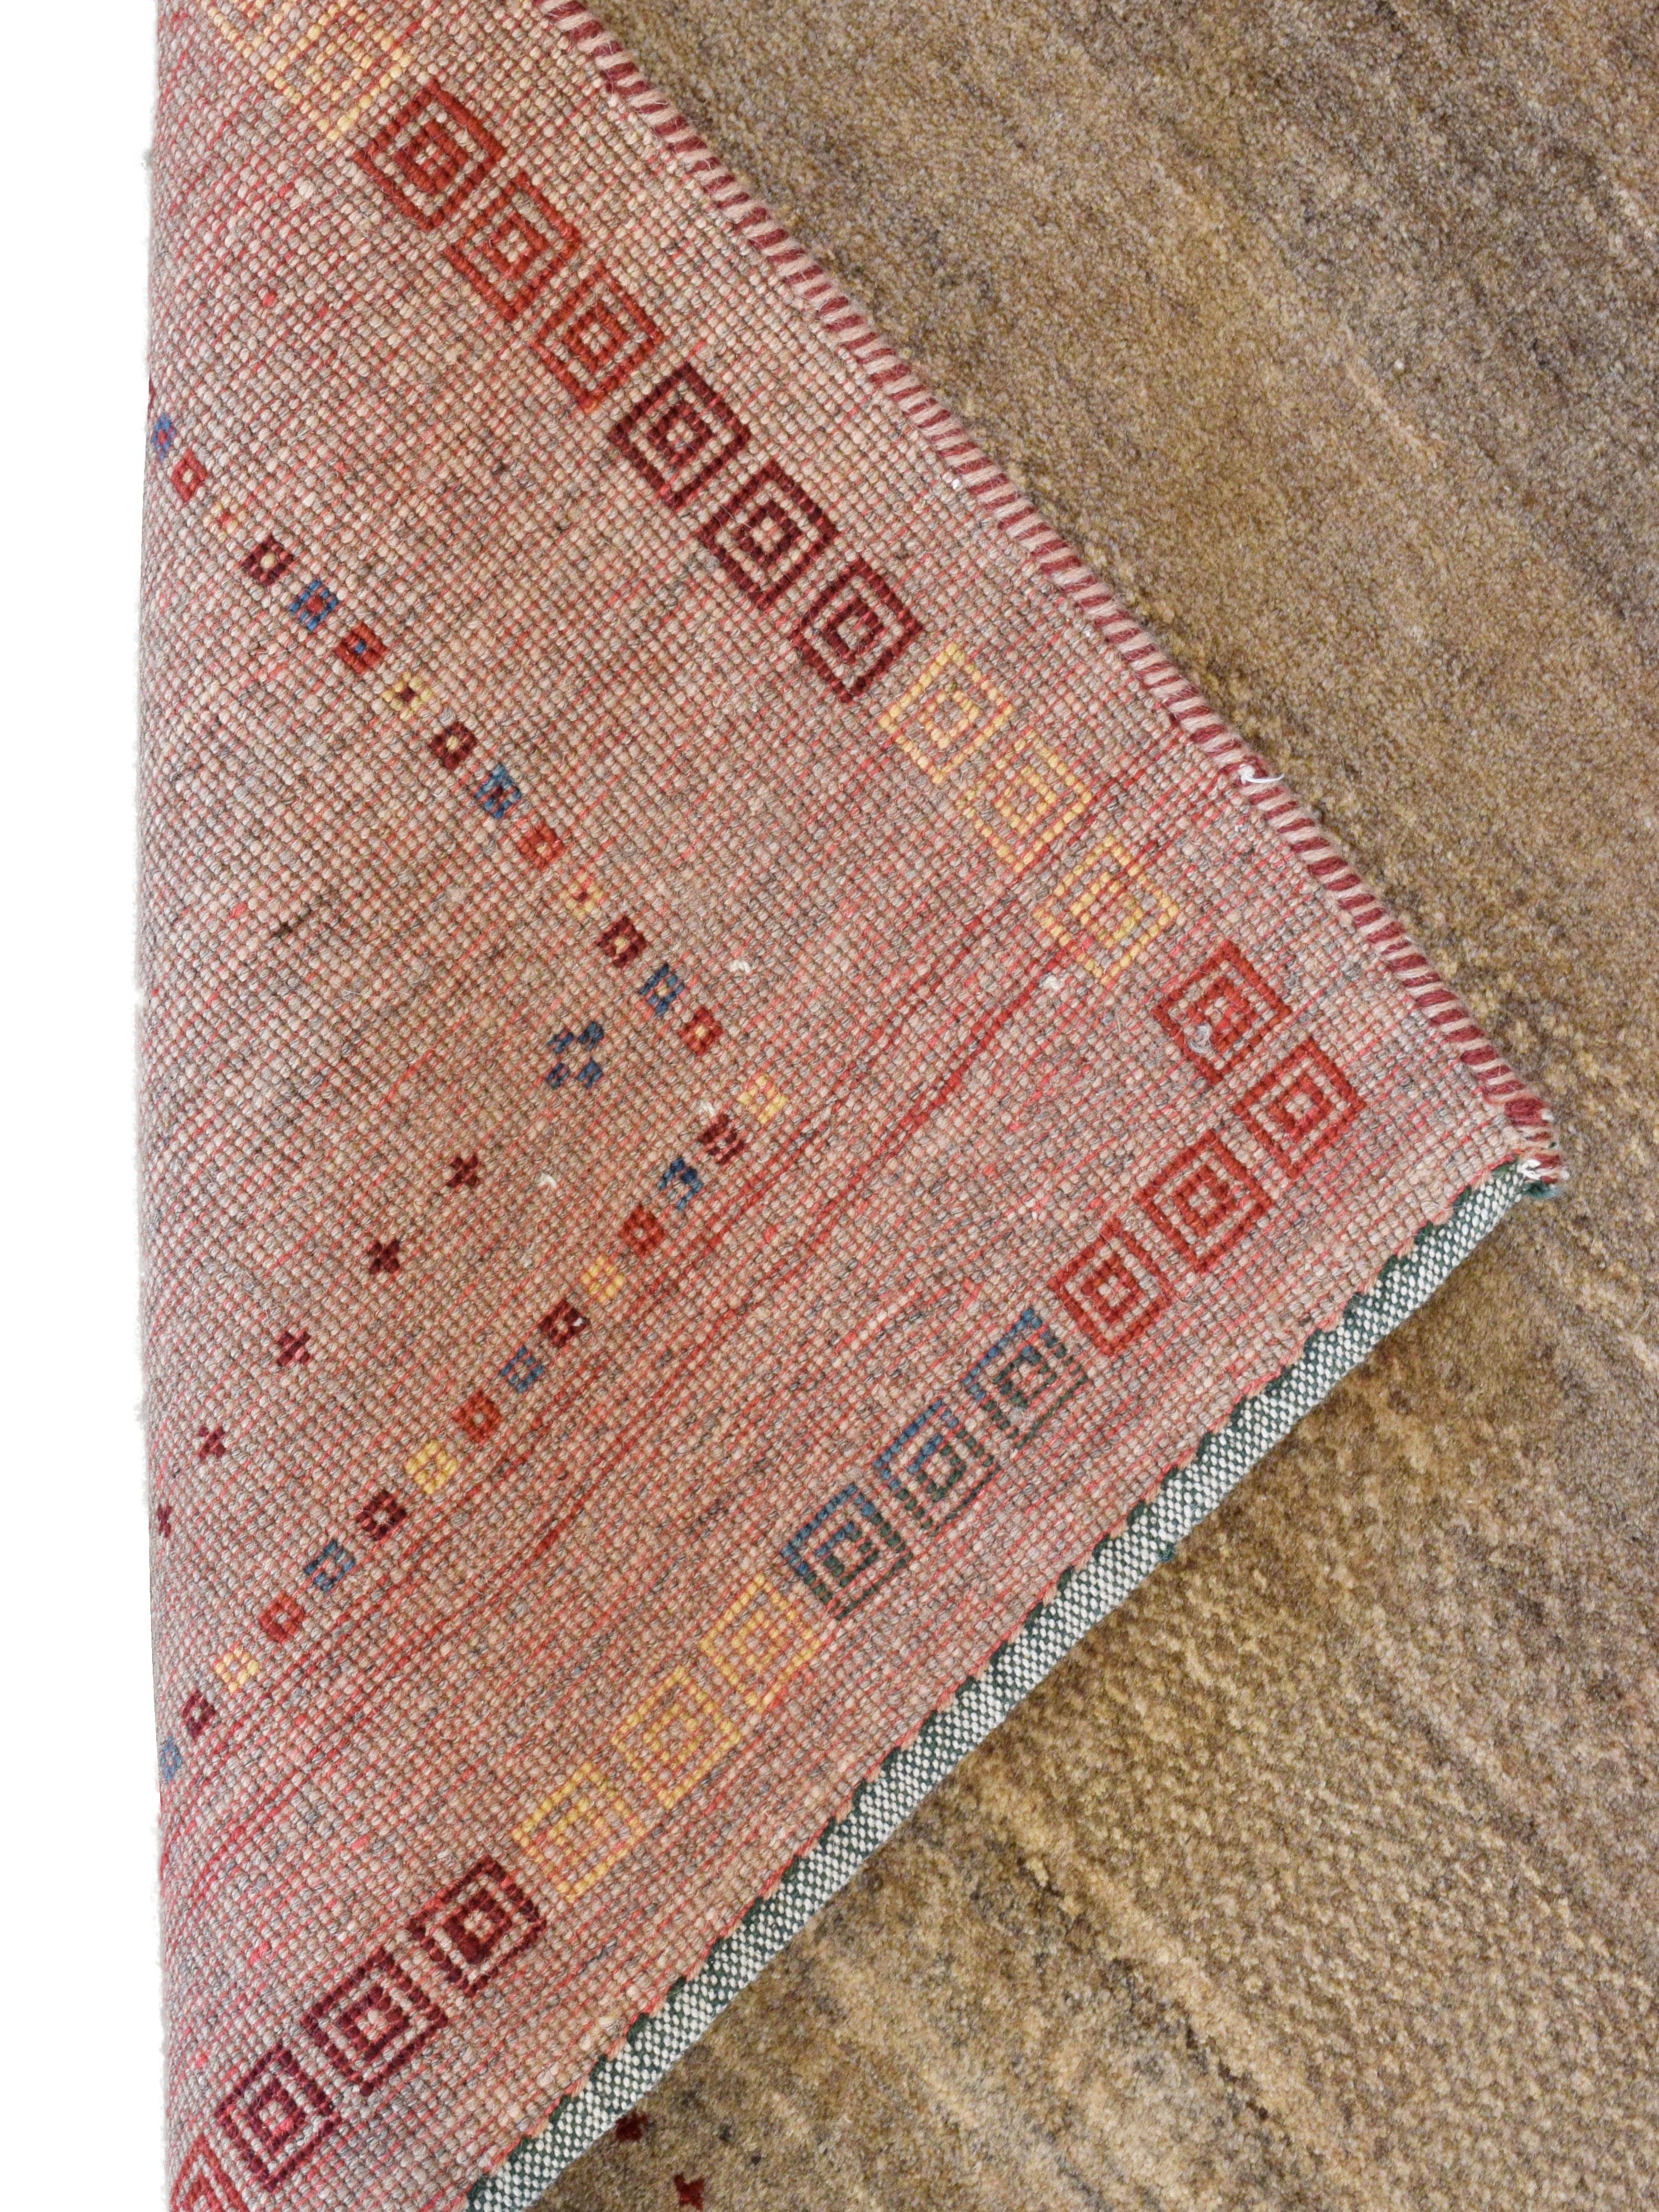 Striking tones of taupe, gold, red, blue, and orange highlight the splendidly striated field of this neutral brown Persian Gabbeh area rug in wool that measures approximately 4' x 7'. The abrash of this design provides the simplistic background with